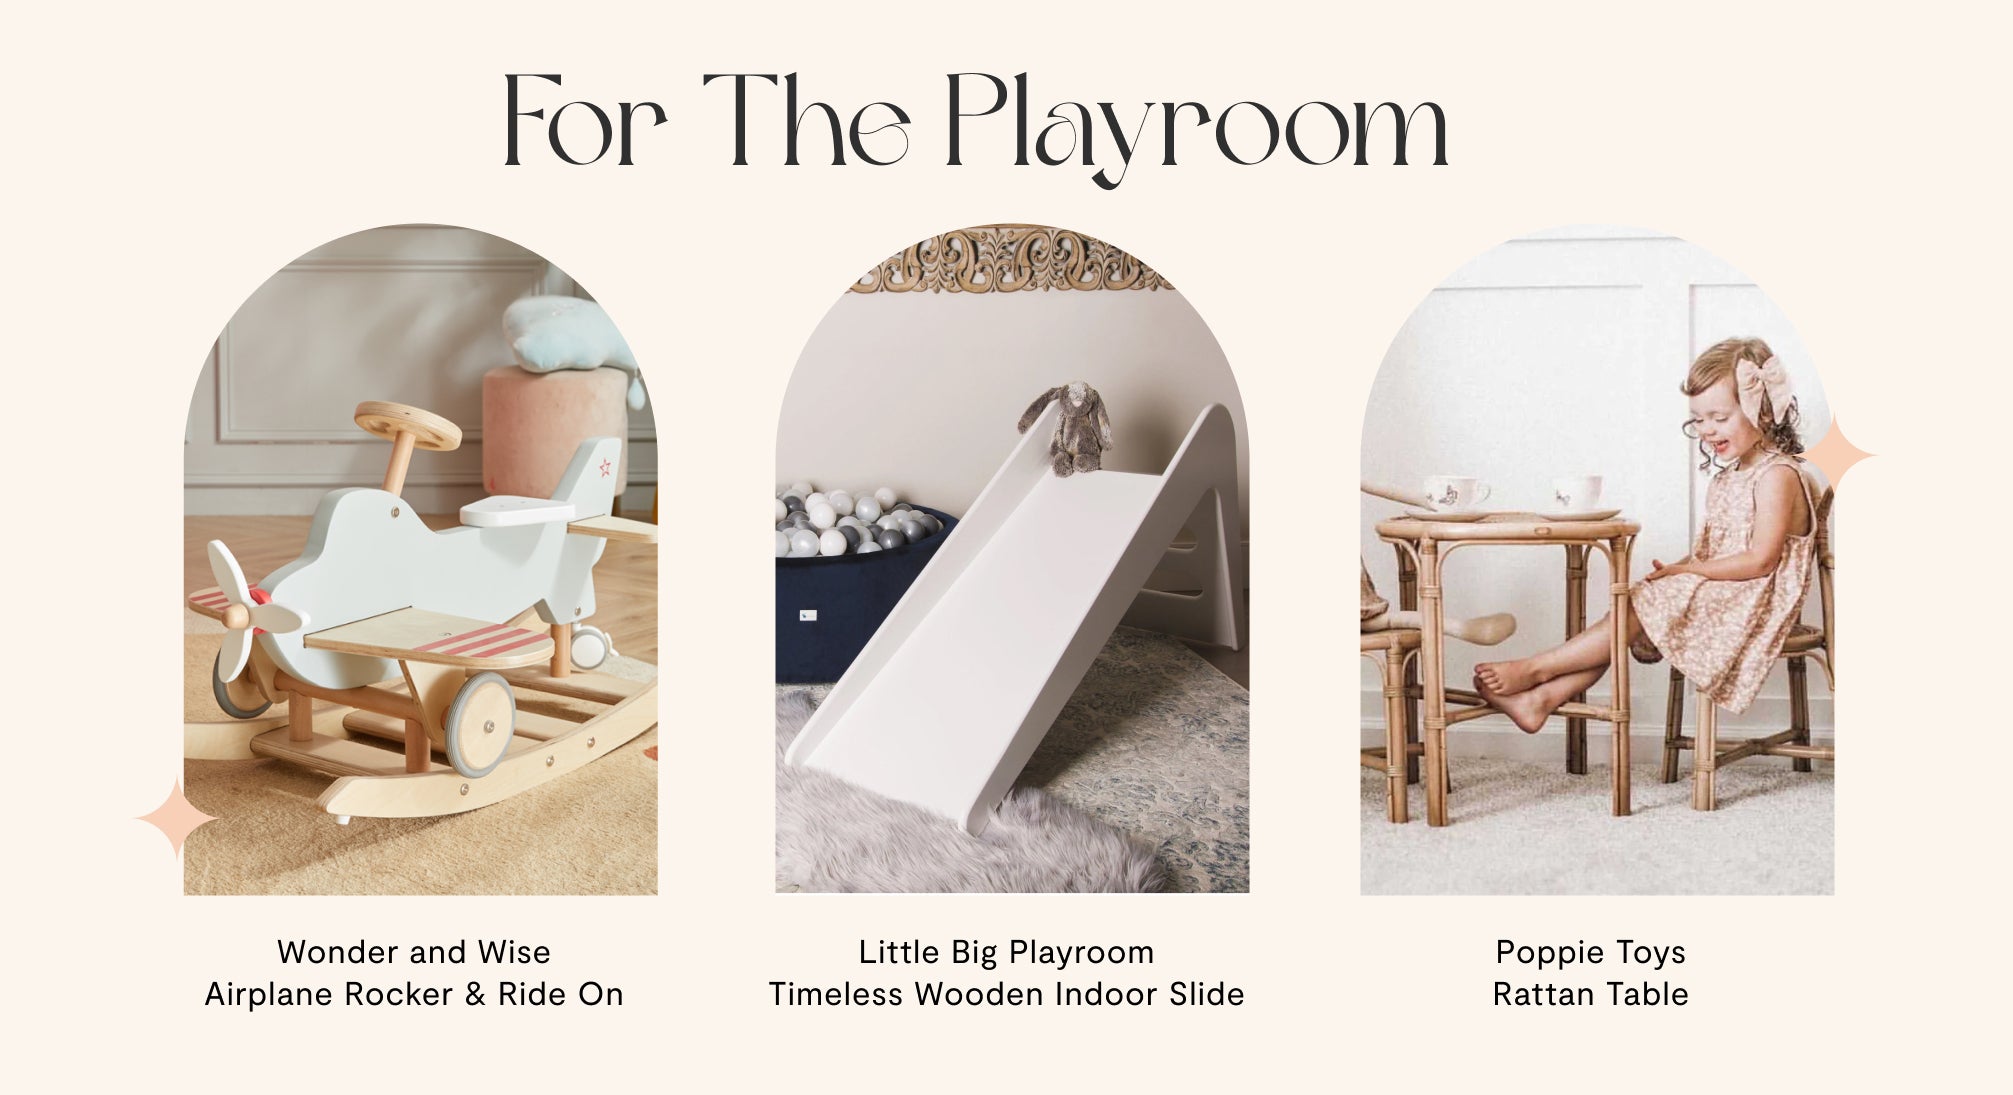 For The Playroom